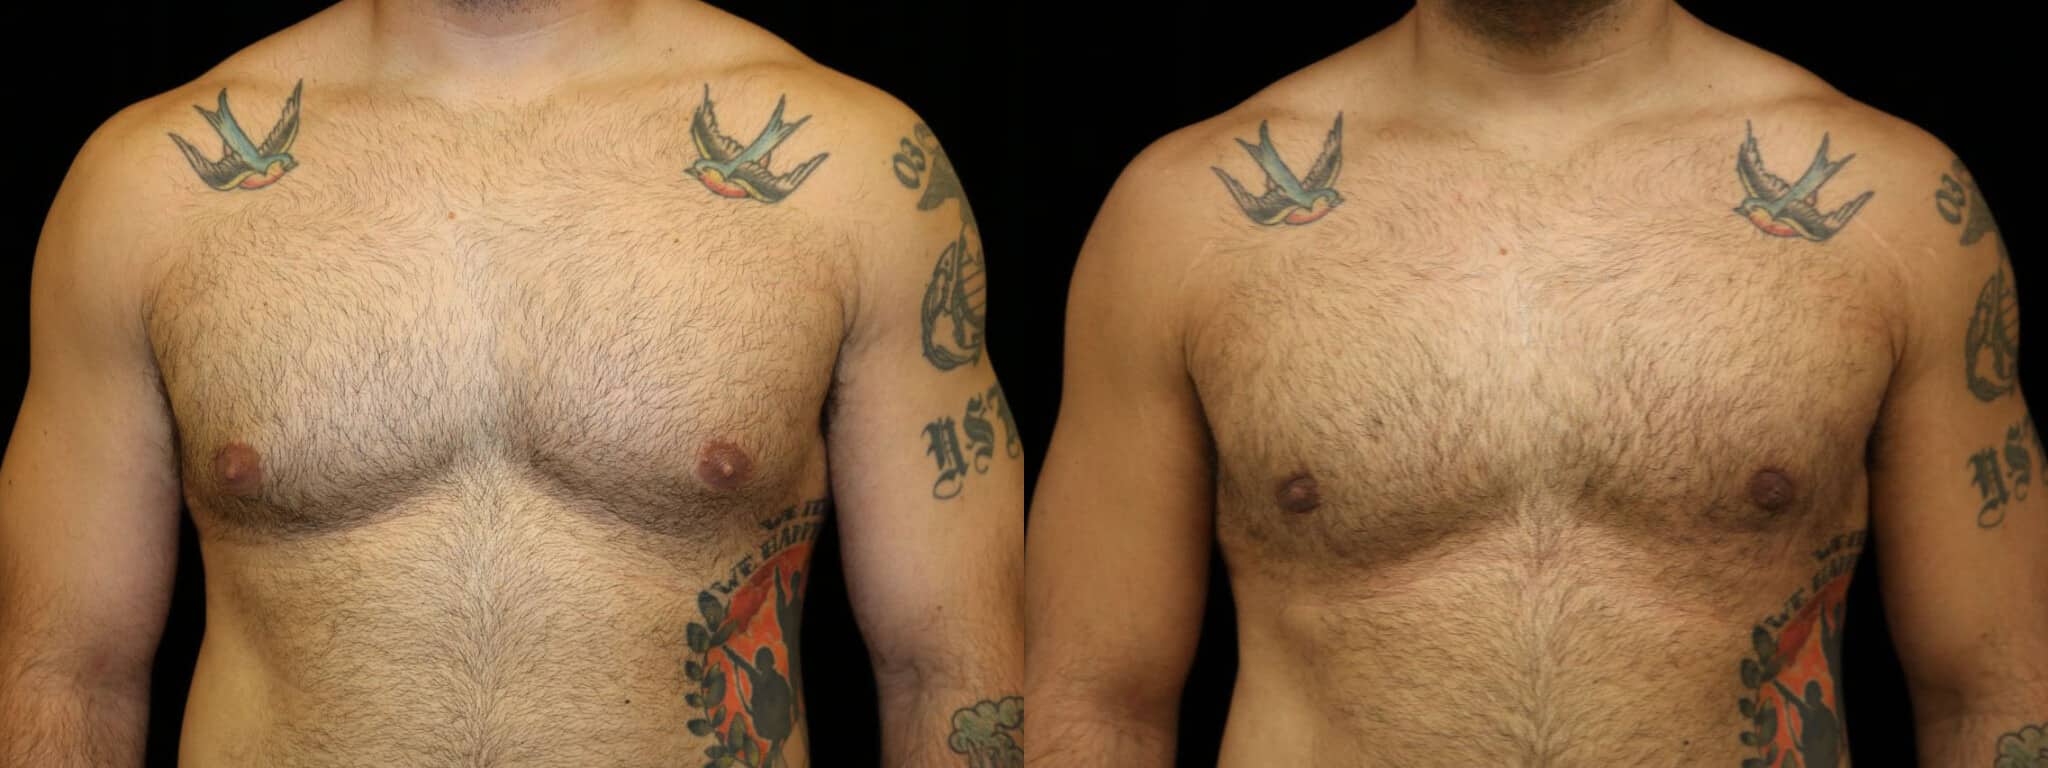 Gynecomastia Patient 6 Before & After